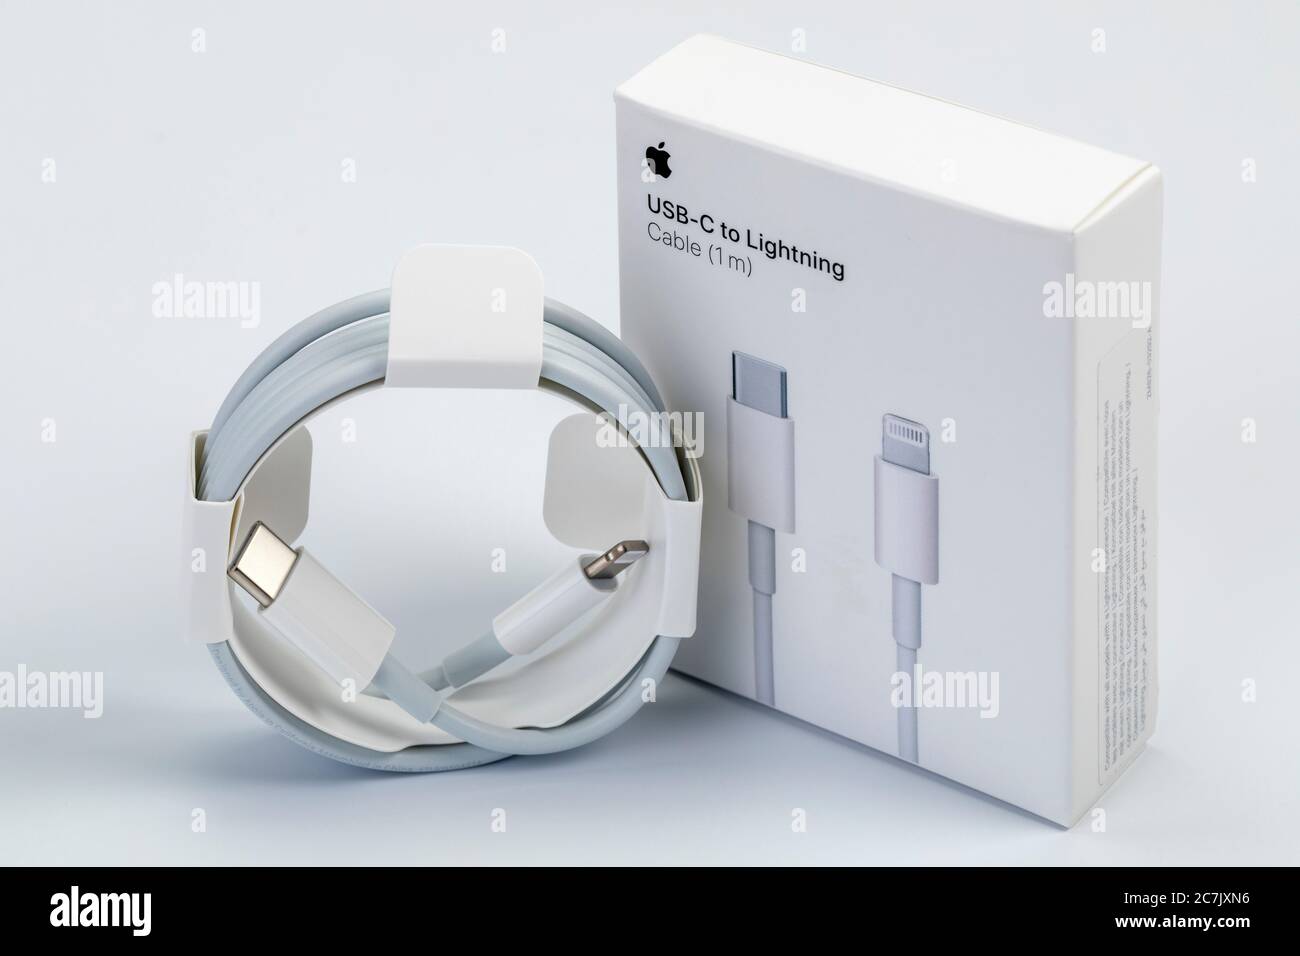 Apple USB-C on Lightning cable, original packaging, syncing, charging, white background, Stock Photo